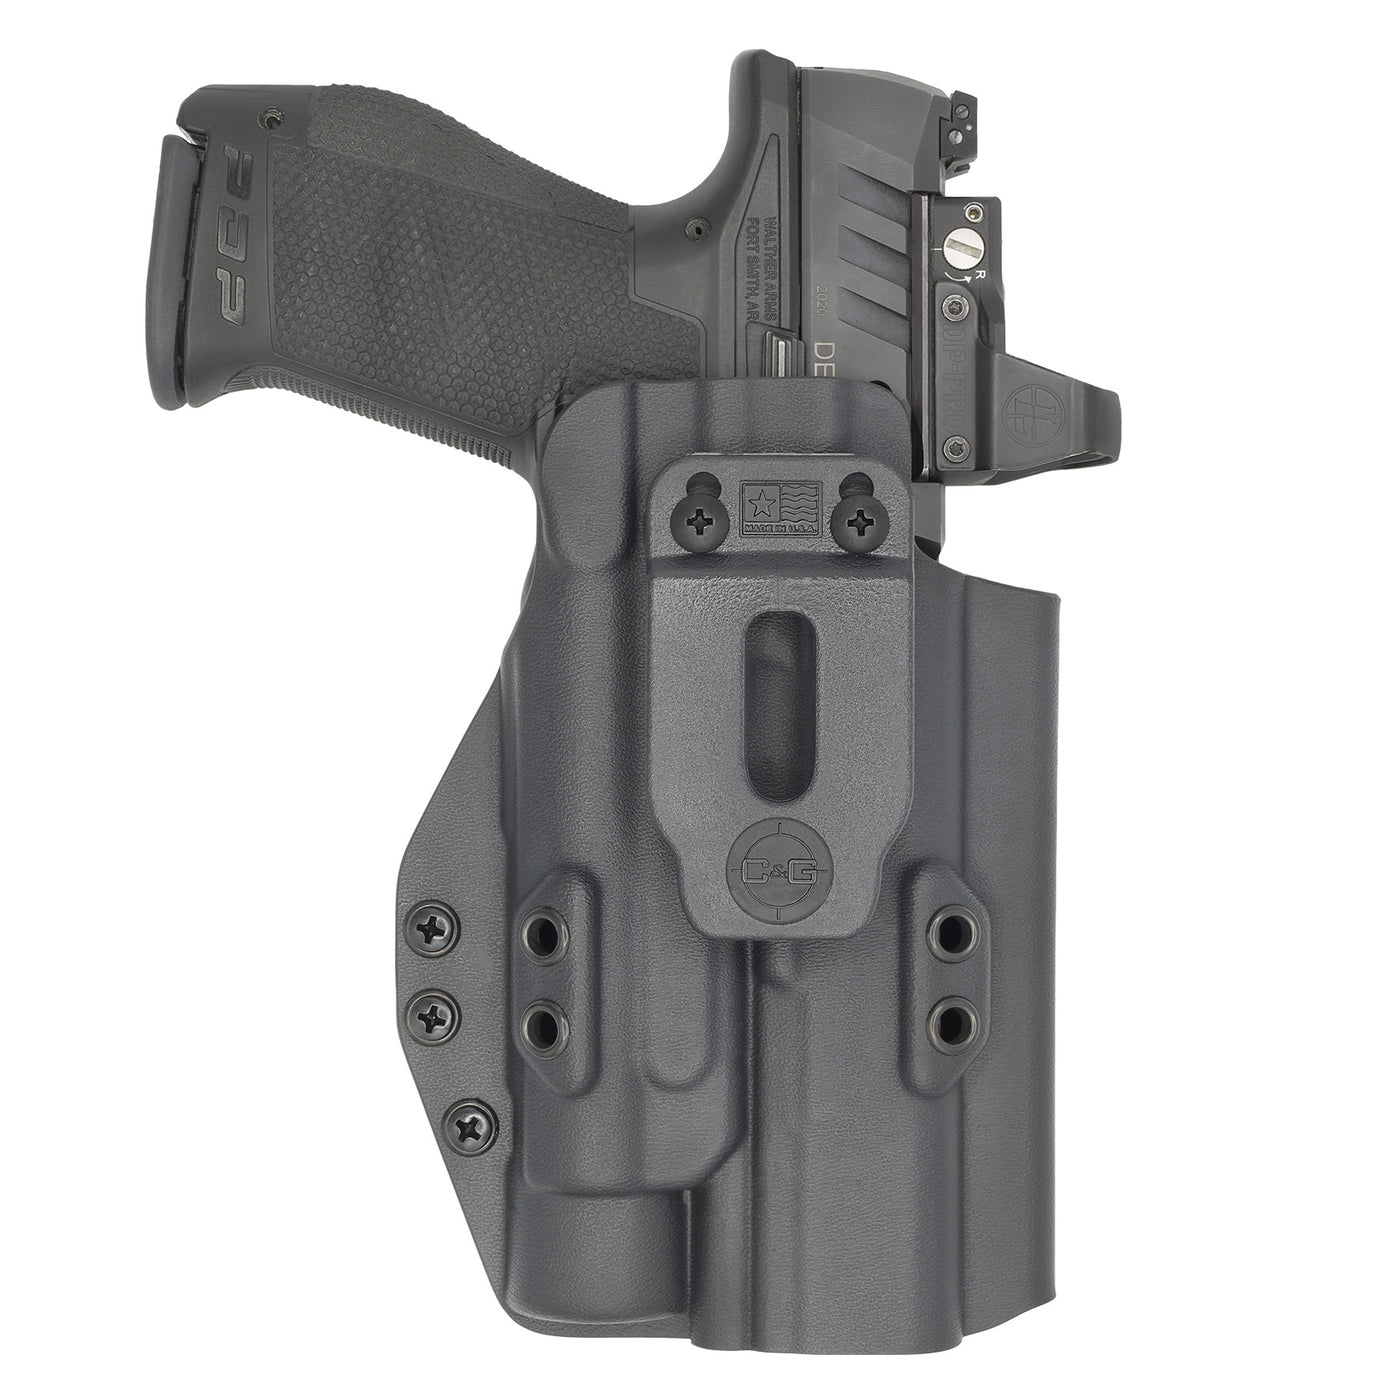 C&G Holsters quickship IWB Tactical H&K P30/sk Streamlight TLR1 in holstered position